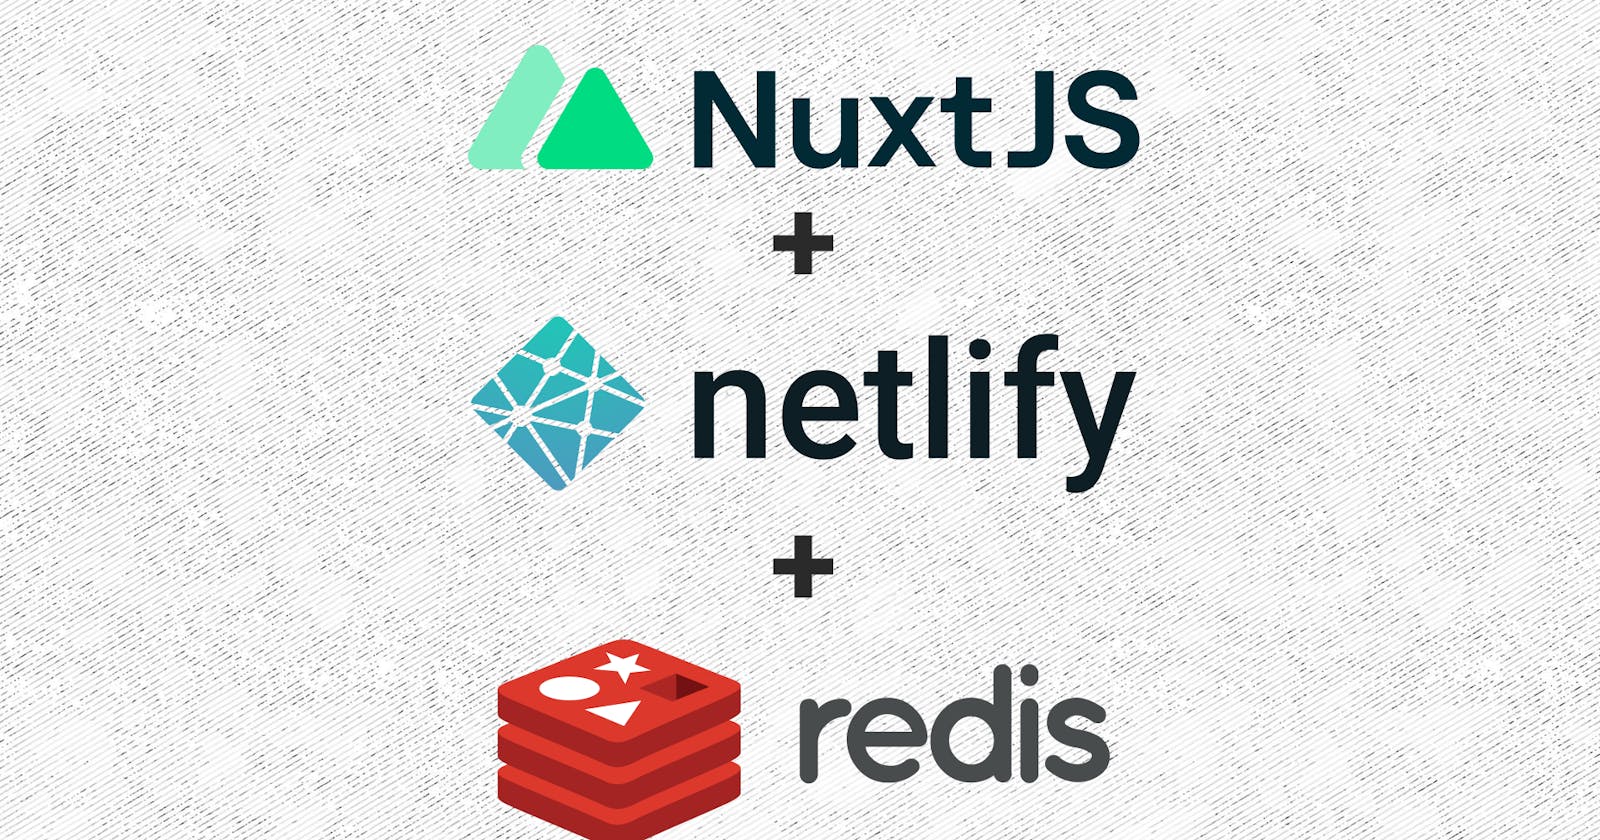 Building An Application Using NuxtJS, Netlify-Functions and RedisJSON